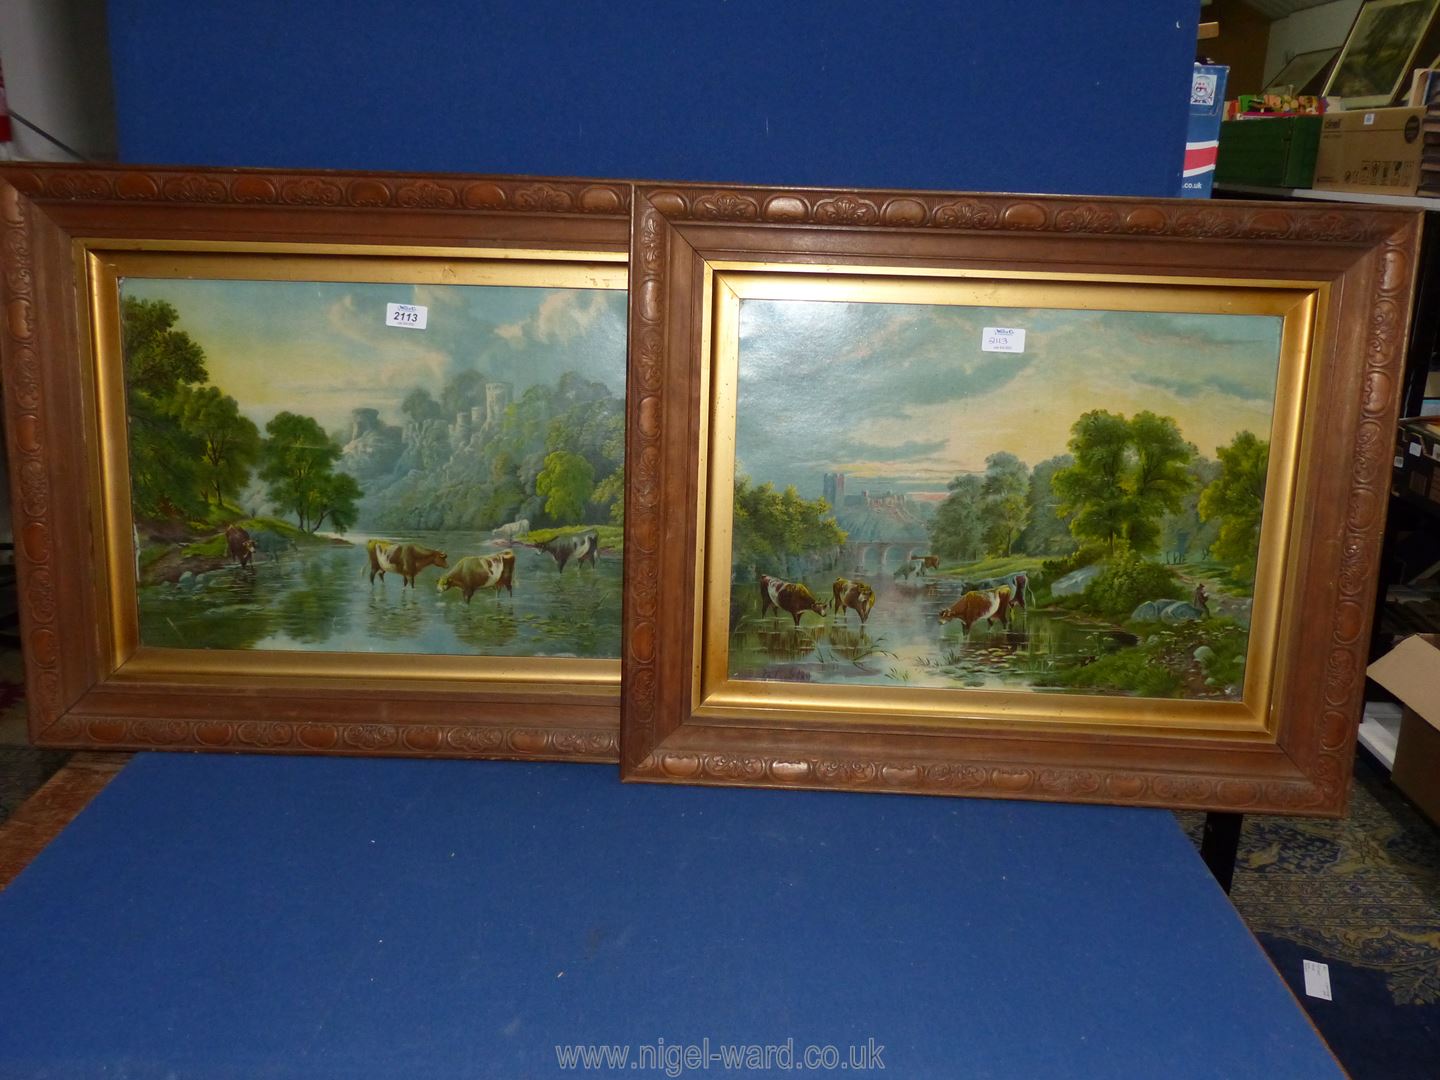 Two wooden framed Prints of cattle drinking in a river by B. Cook, dated 1889. - Image 2 of 2